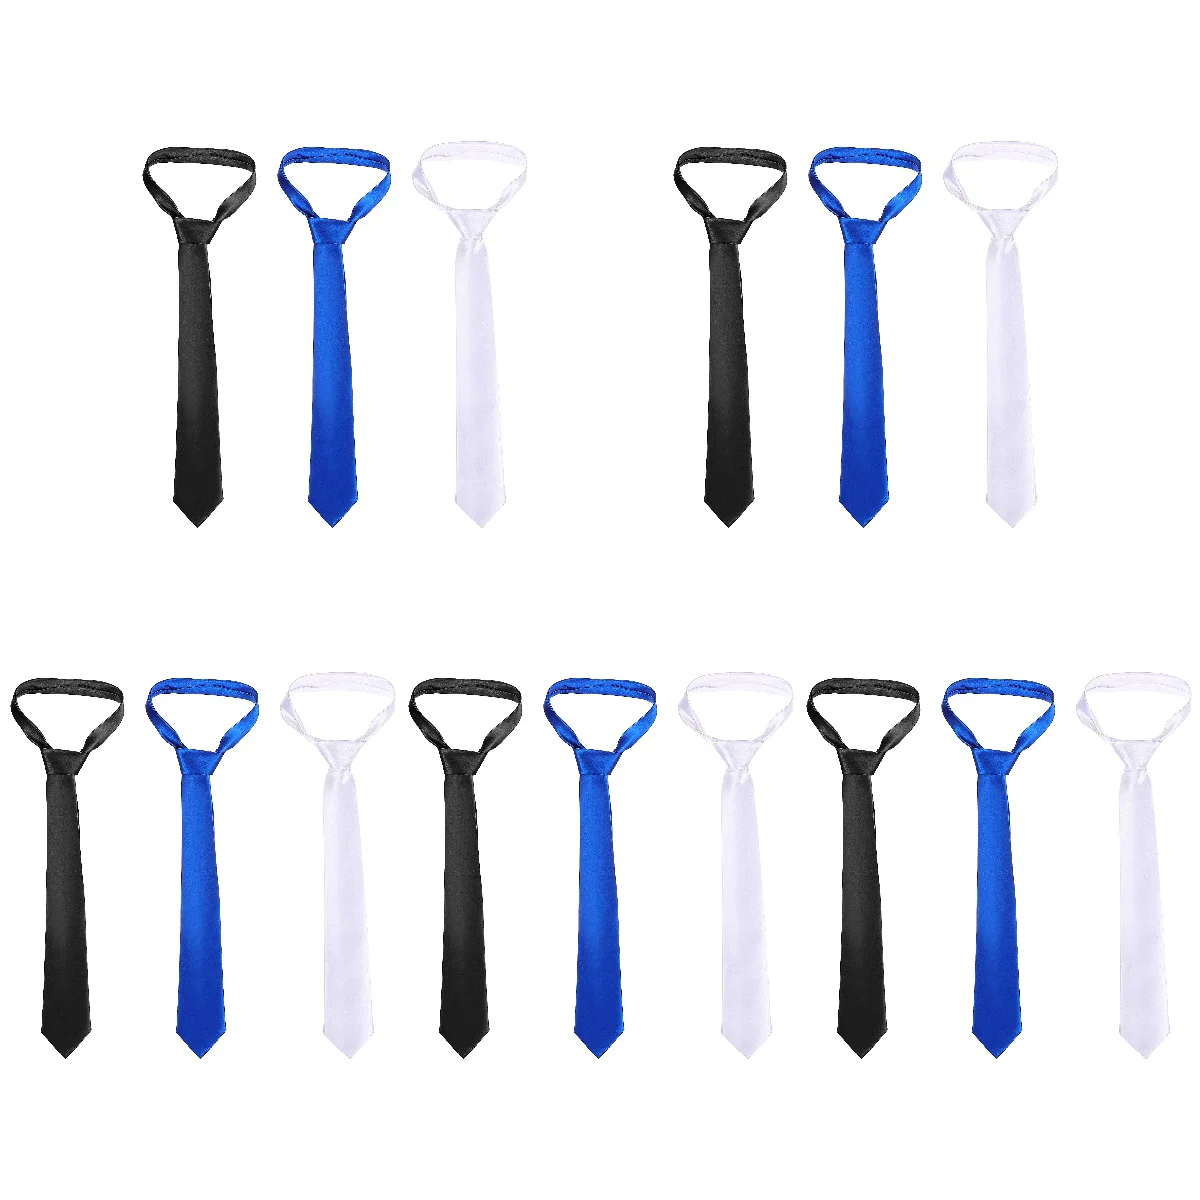 

15 Pcs Satin Ties for Men Solid Color Smooth Touch Formal Neckties Suit Accessories Ties for Wedding Banquet Parties